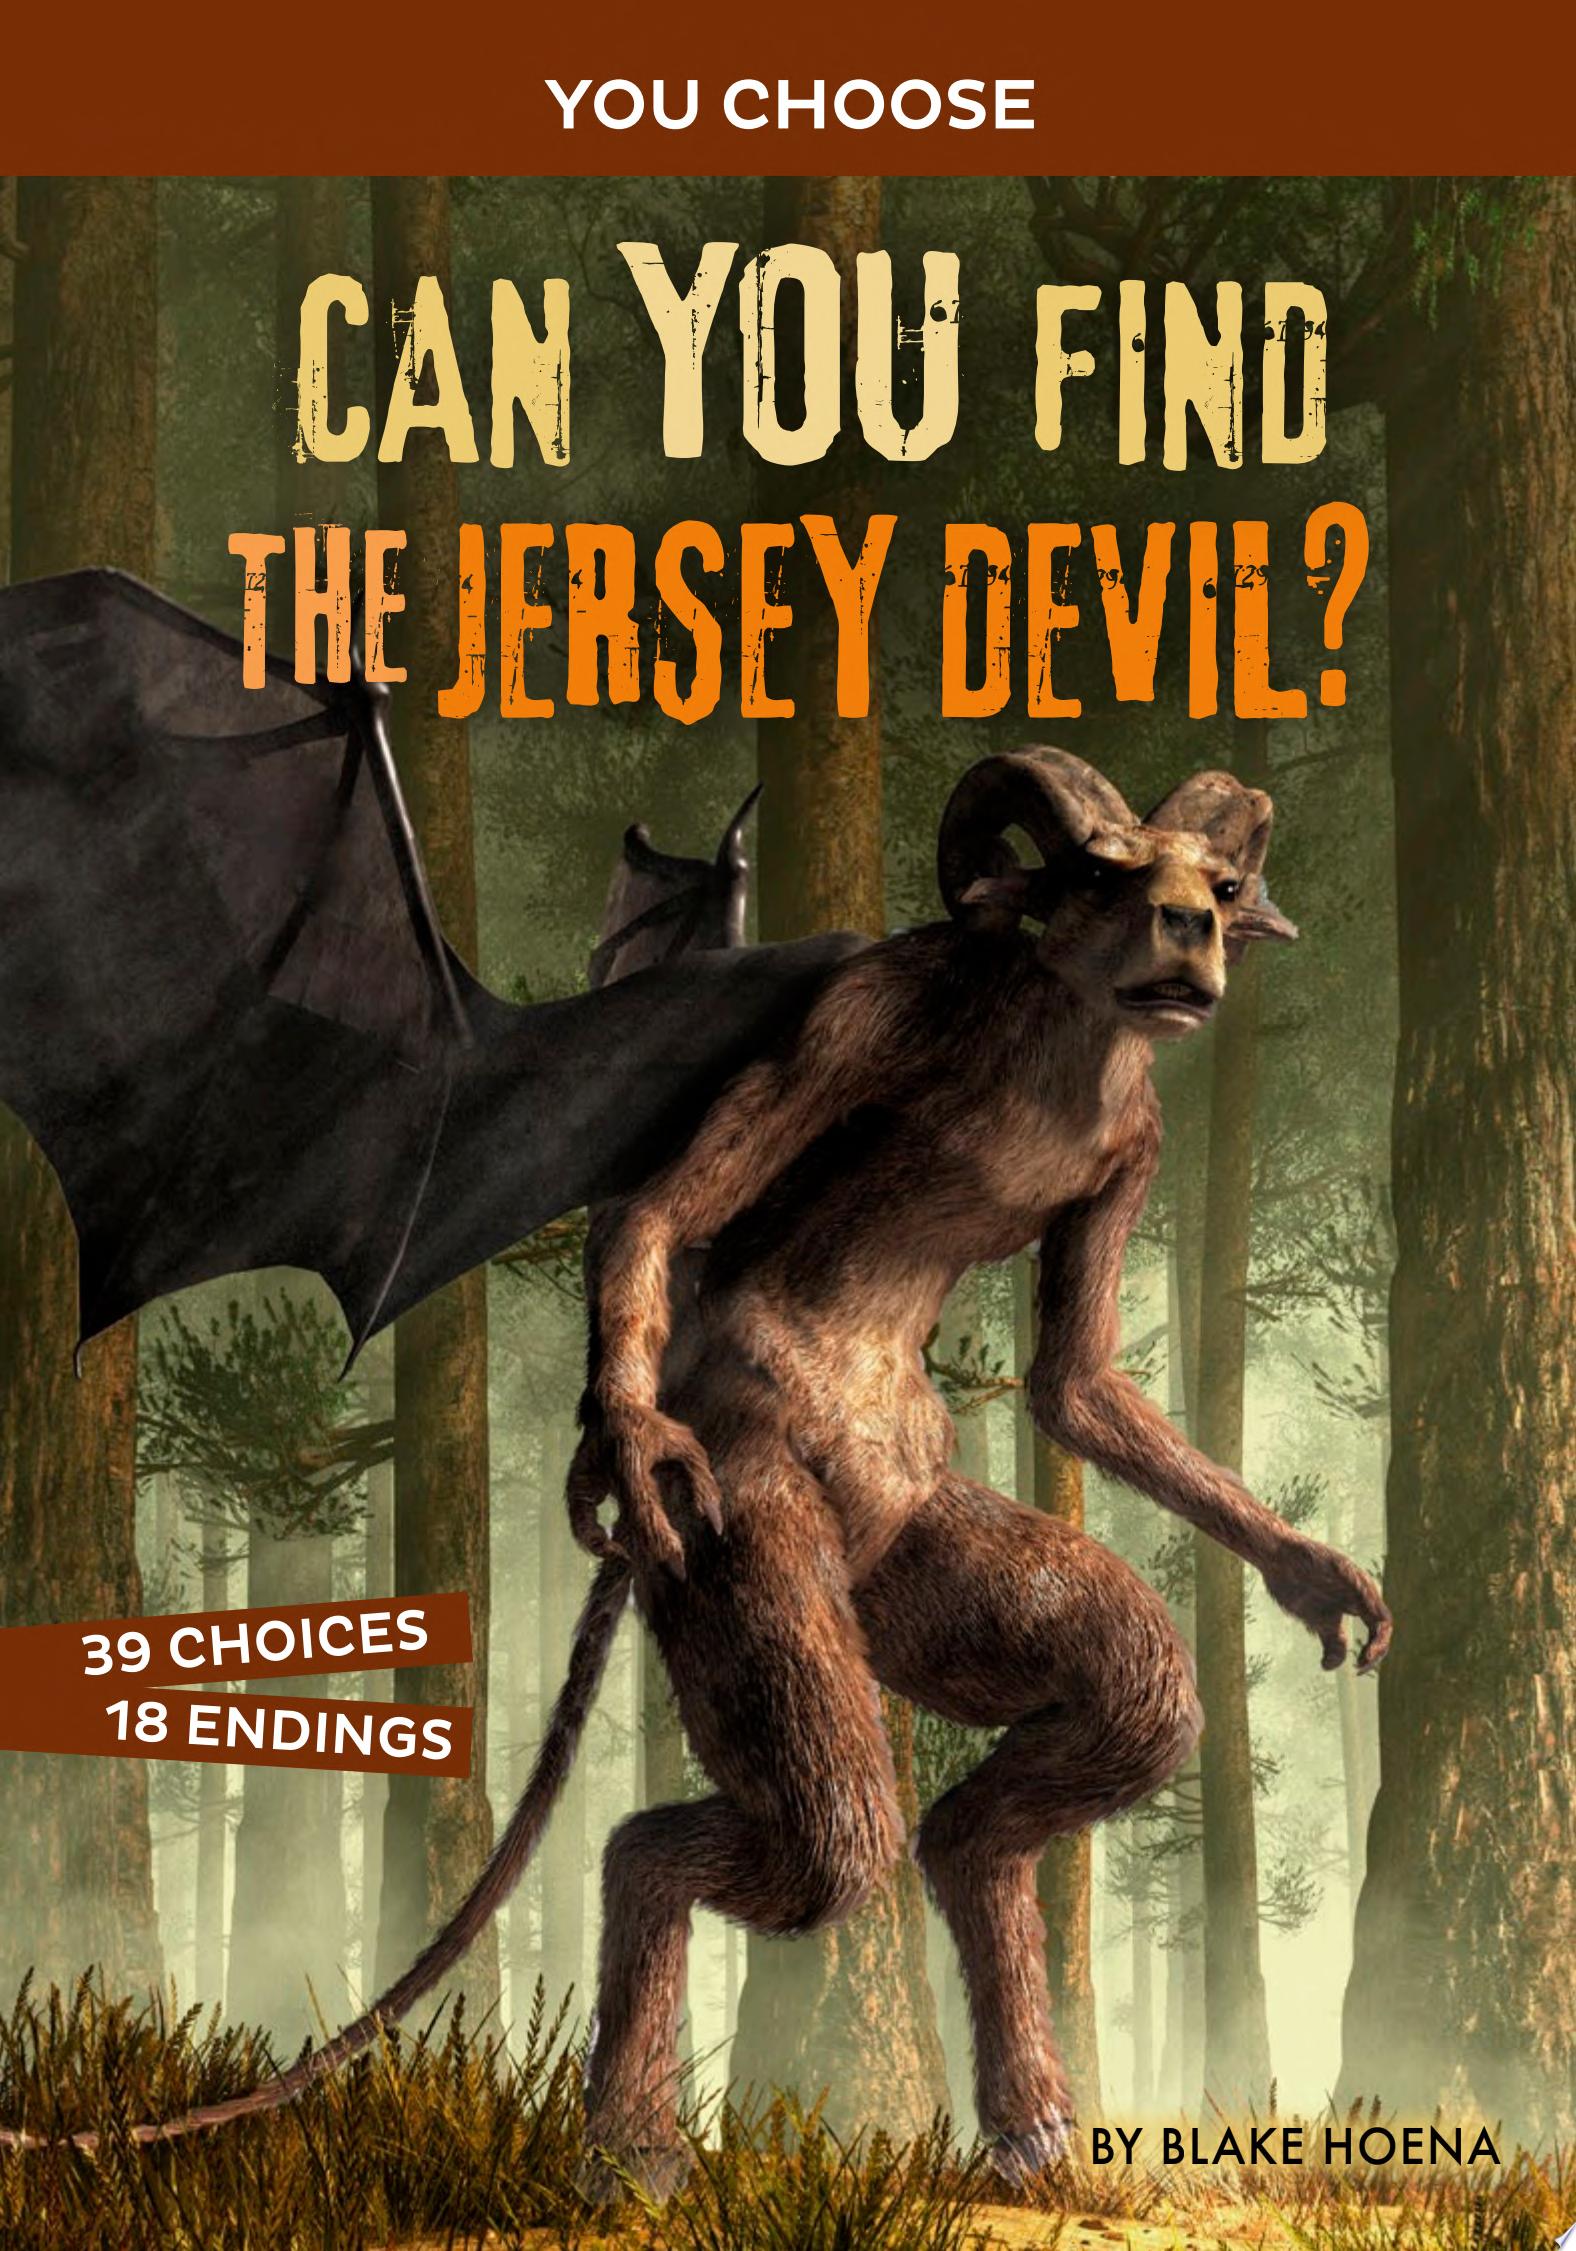 Image for "Can You Find the Jersey Devil?"